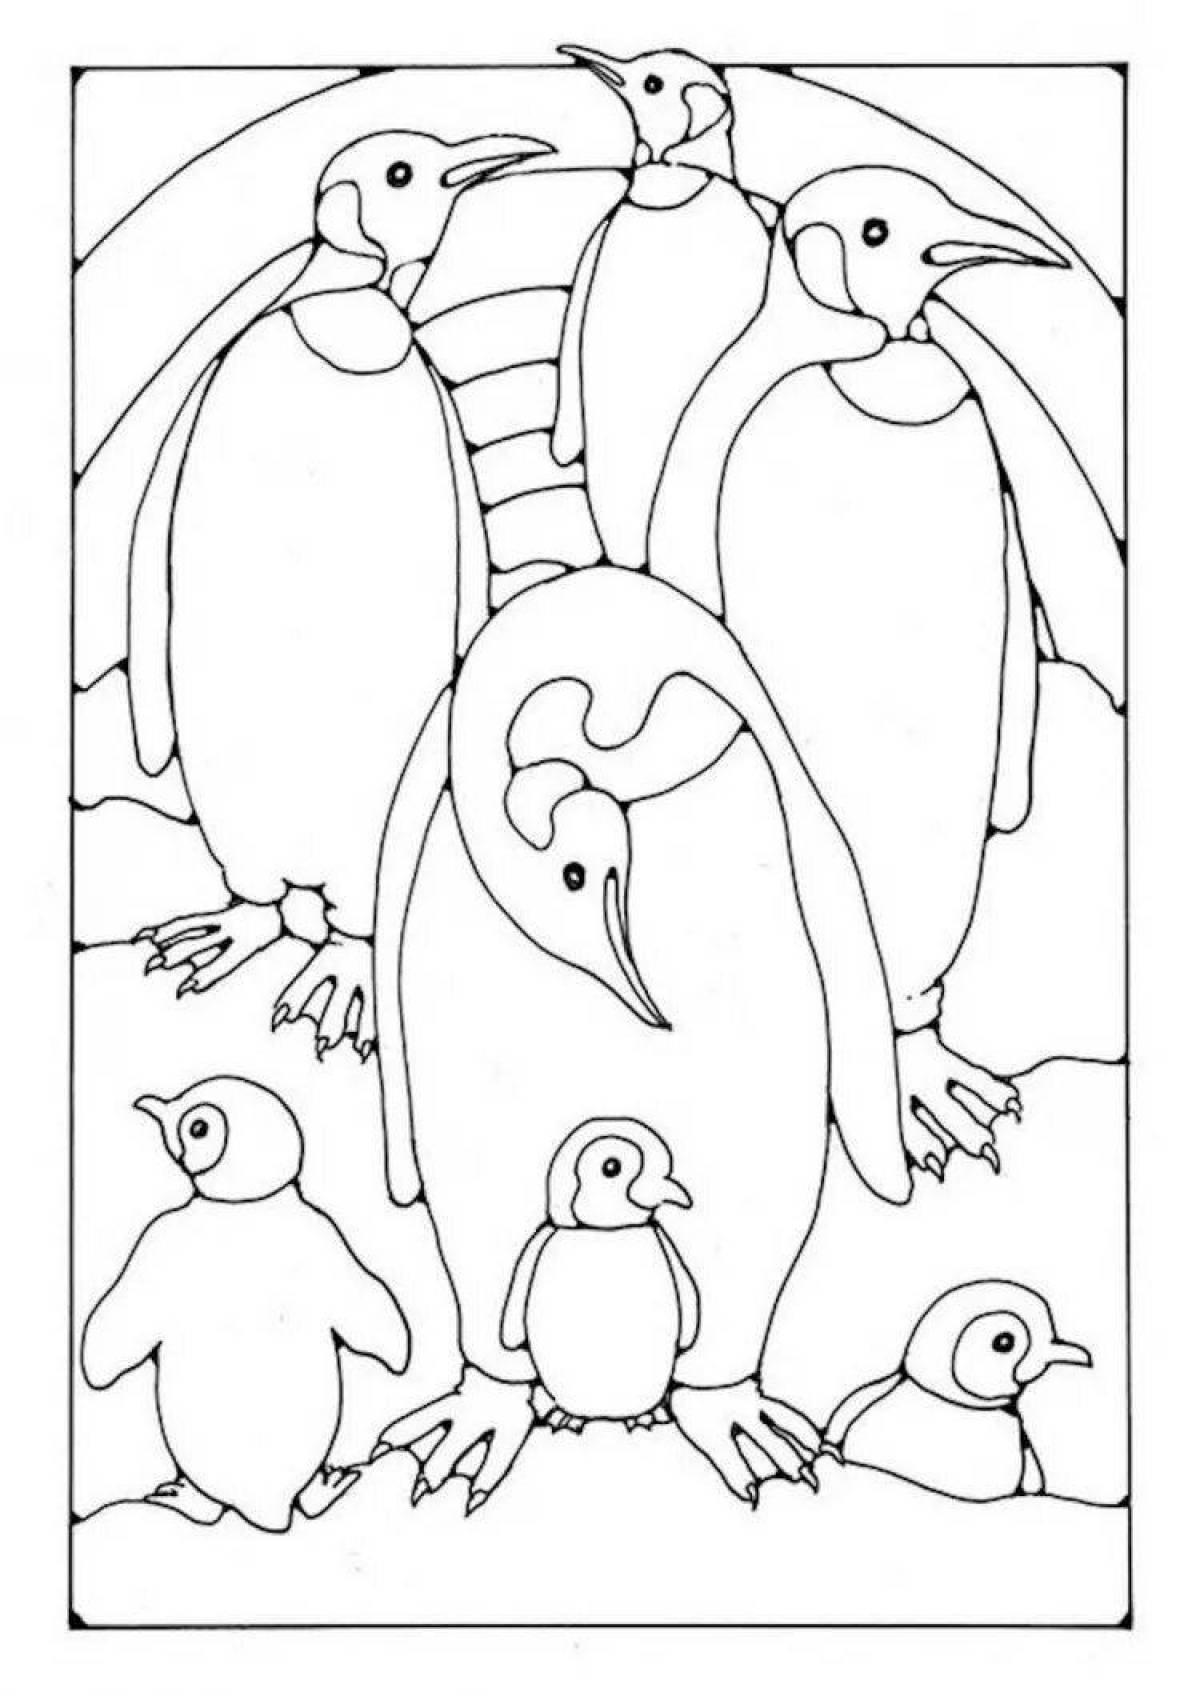 Coloring page happy penguin family